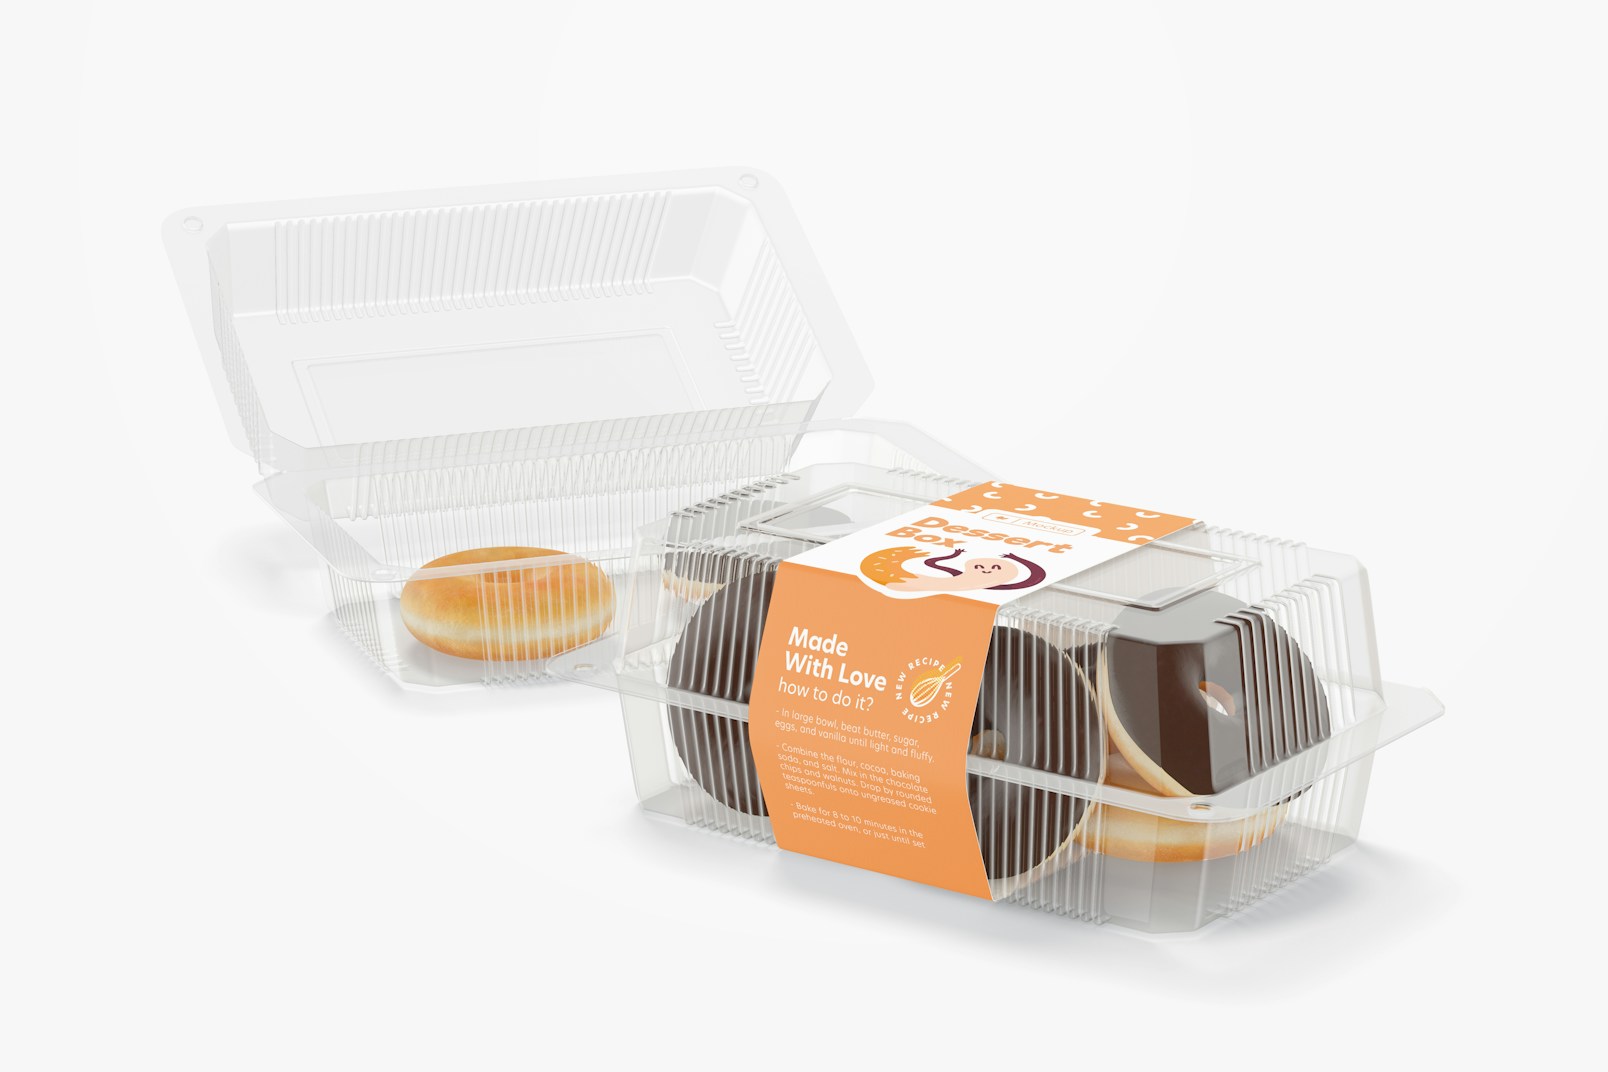 Clear Disposable Dessert Boxes Mockup, Opened and Closed